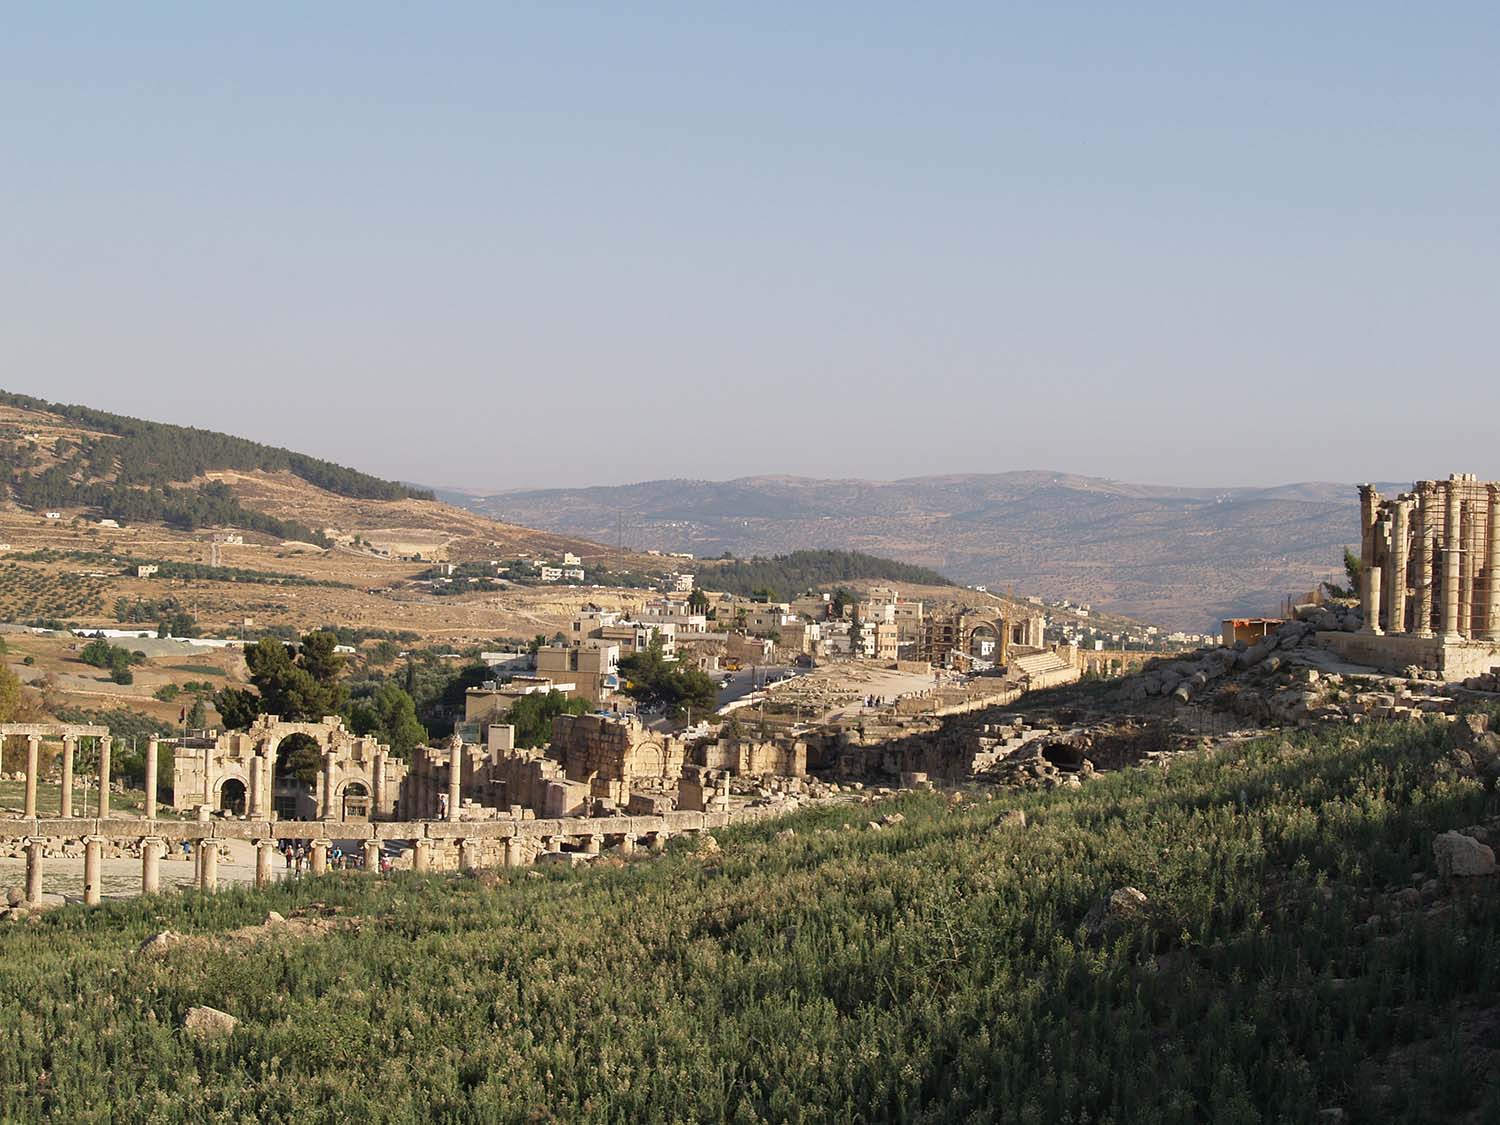 View of Oval Plaza and South Gate (left), Zeus Temple Complex (far right), and Arch of Hadrian and Hippodrome (background)